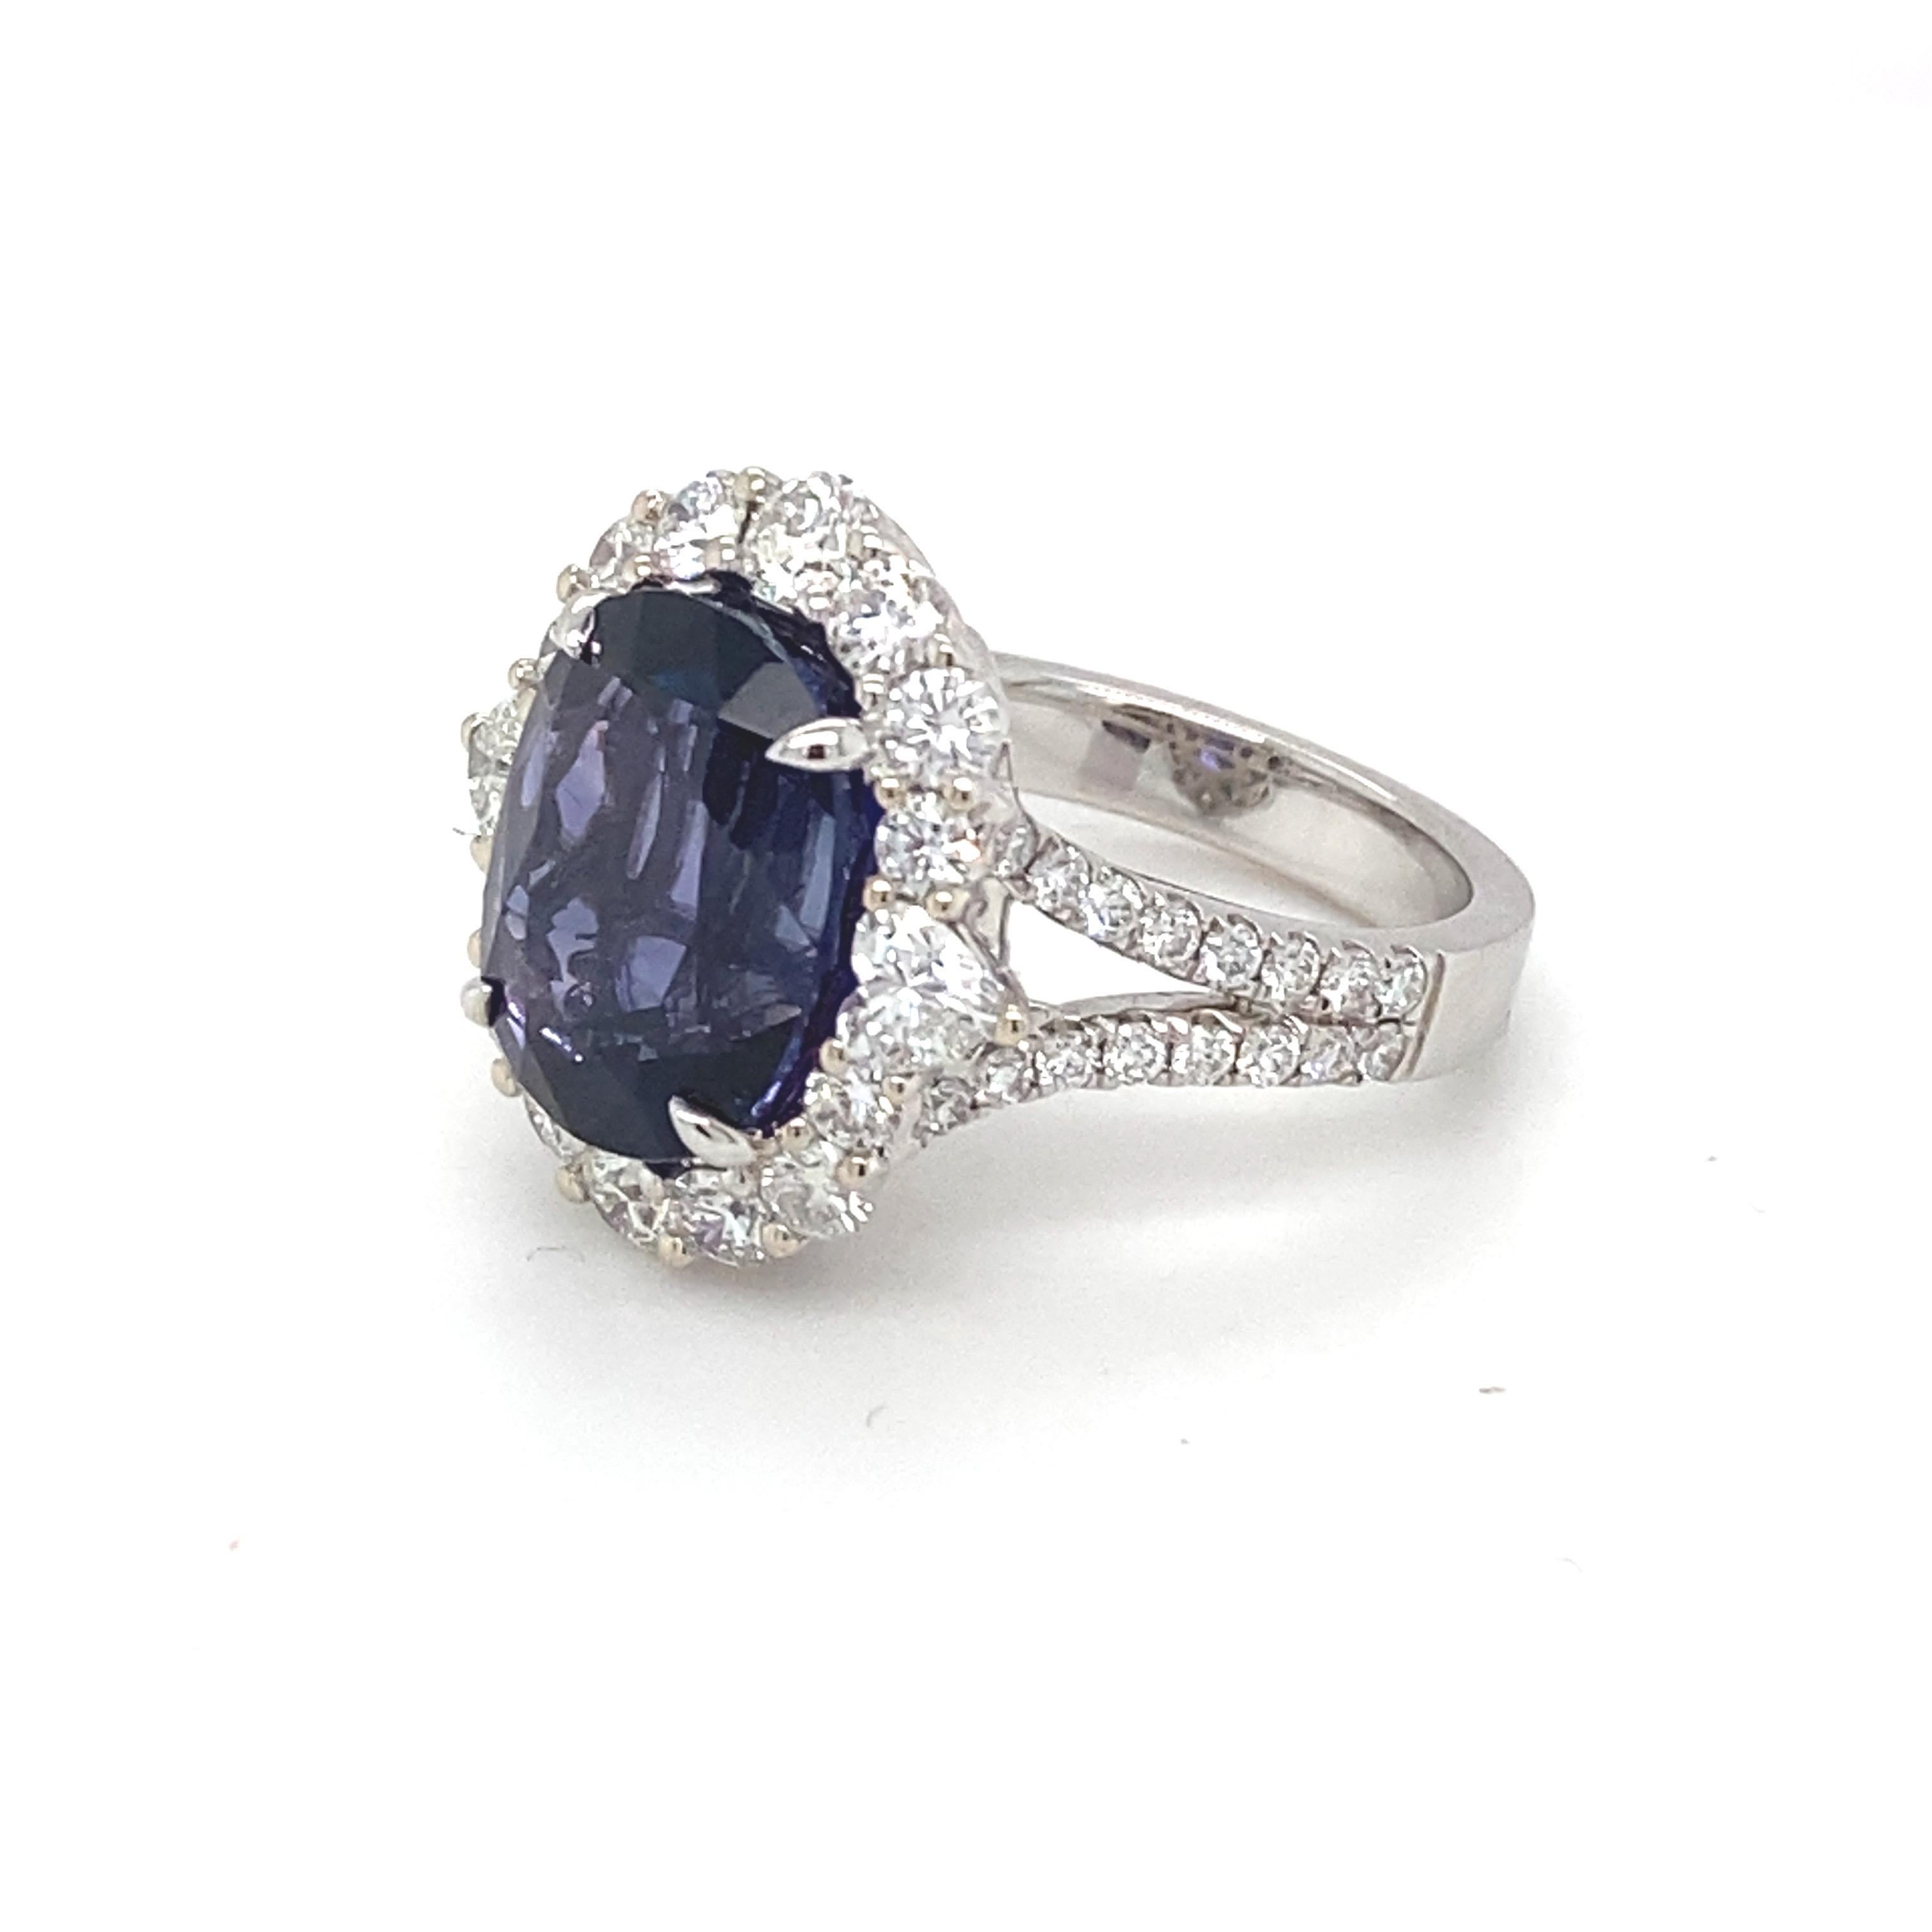 GIA Certified 10.04 Carat Violet Blue Oval Sapphire Diamond Engagement Ring  For Sale 10